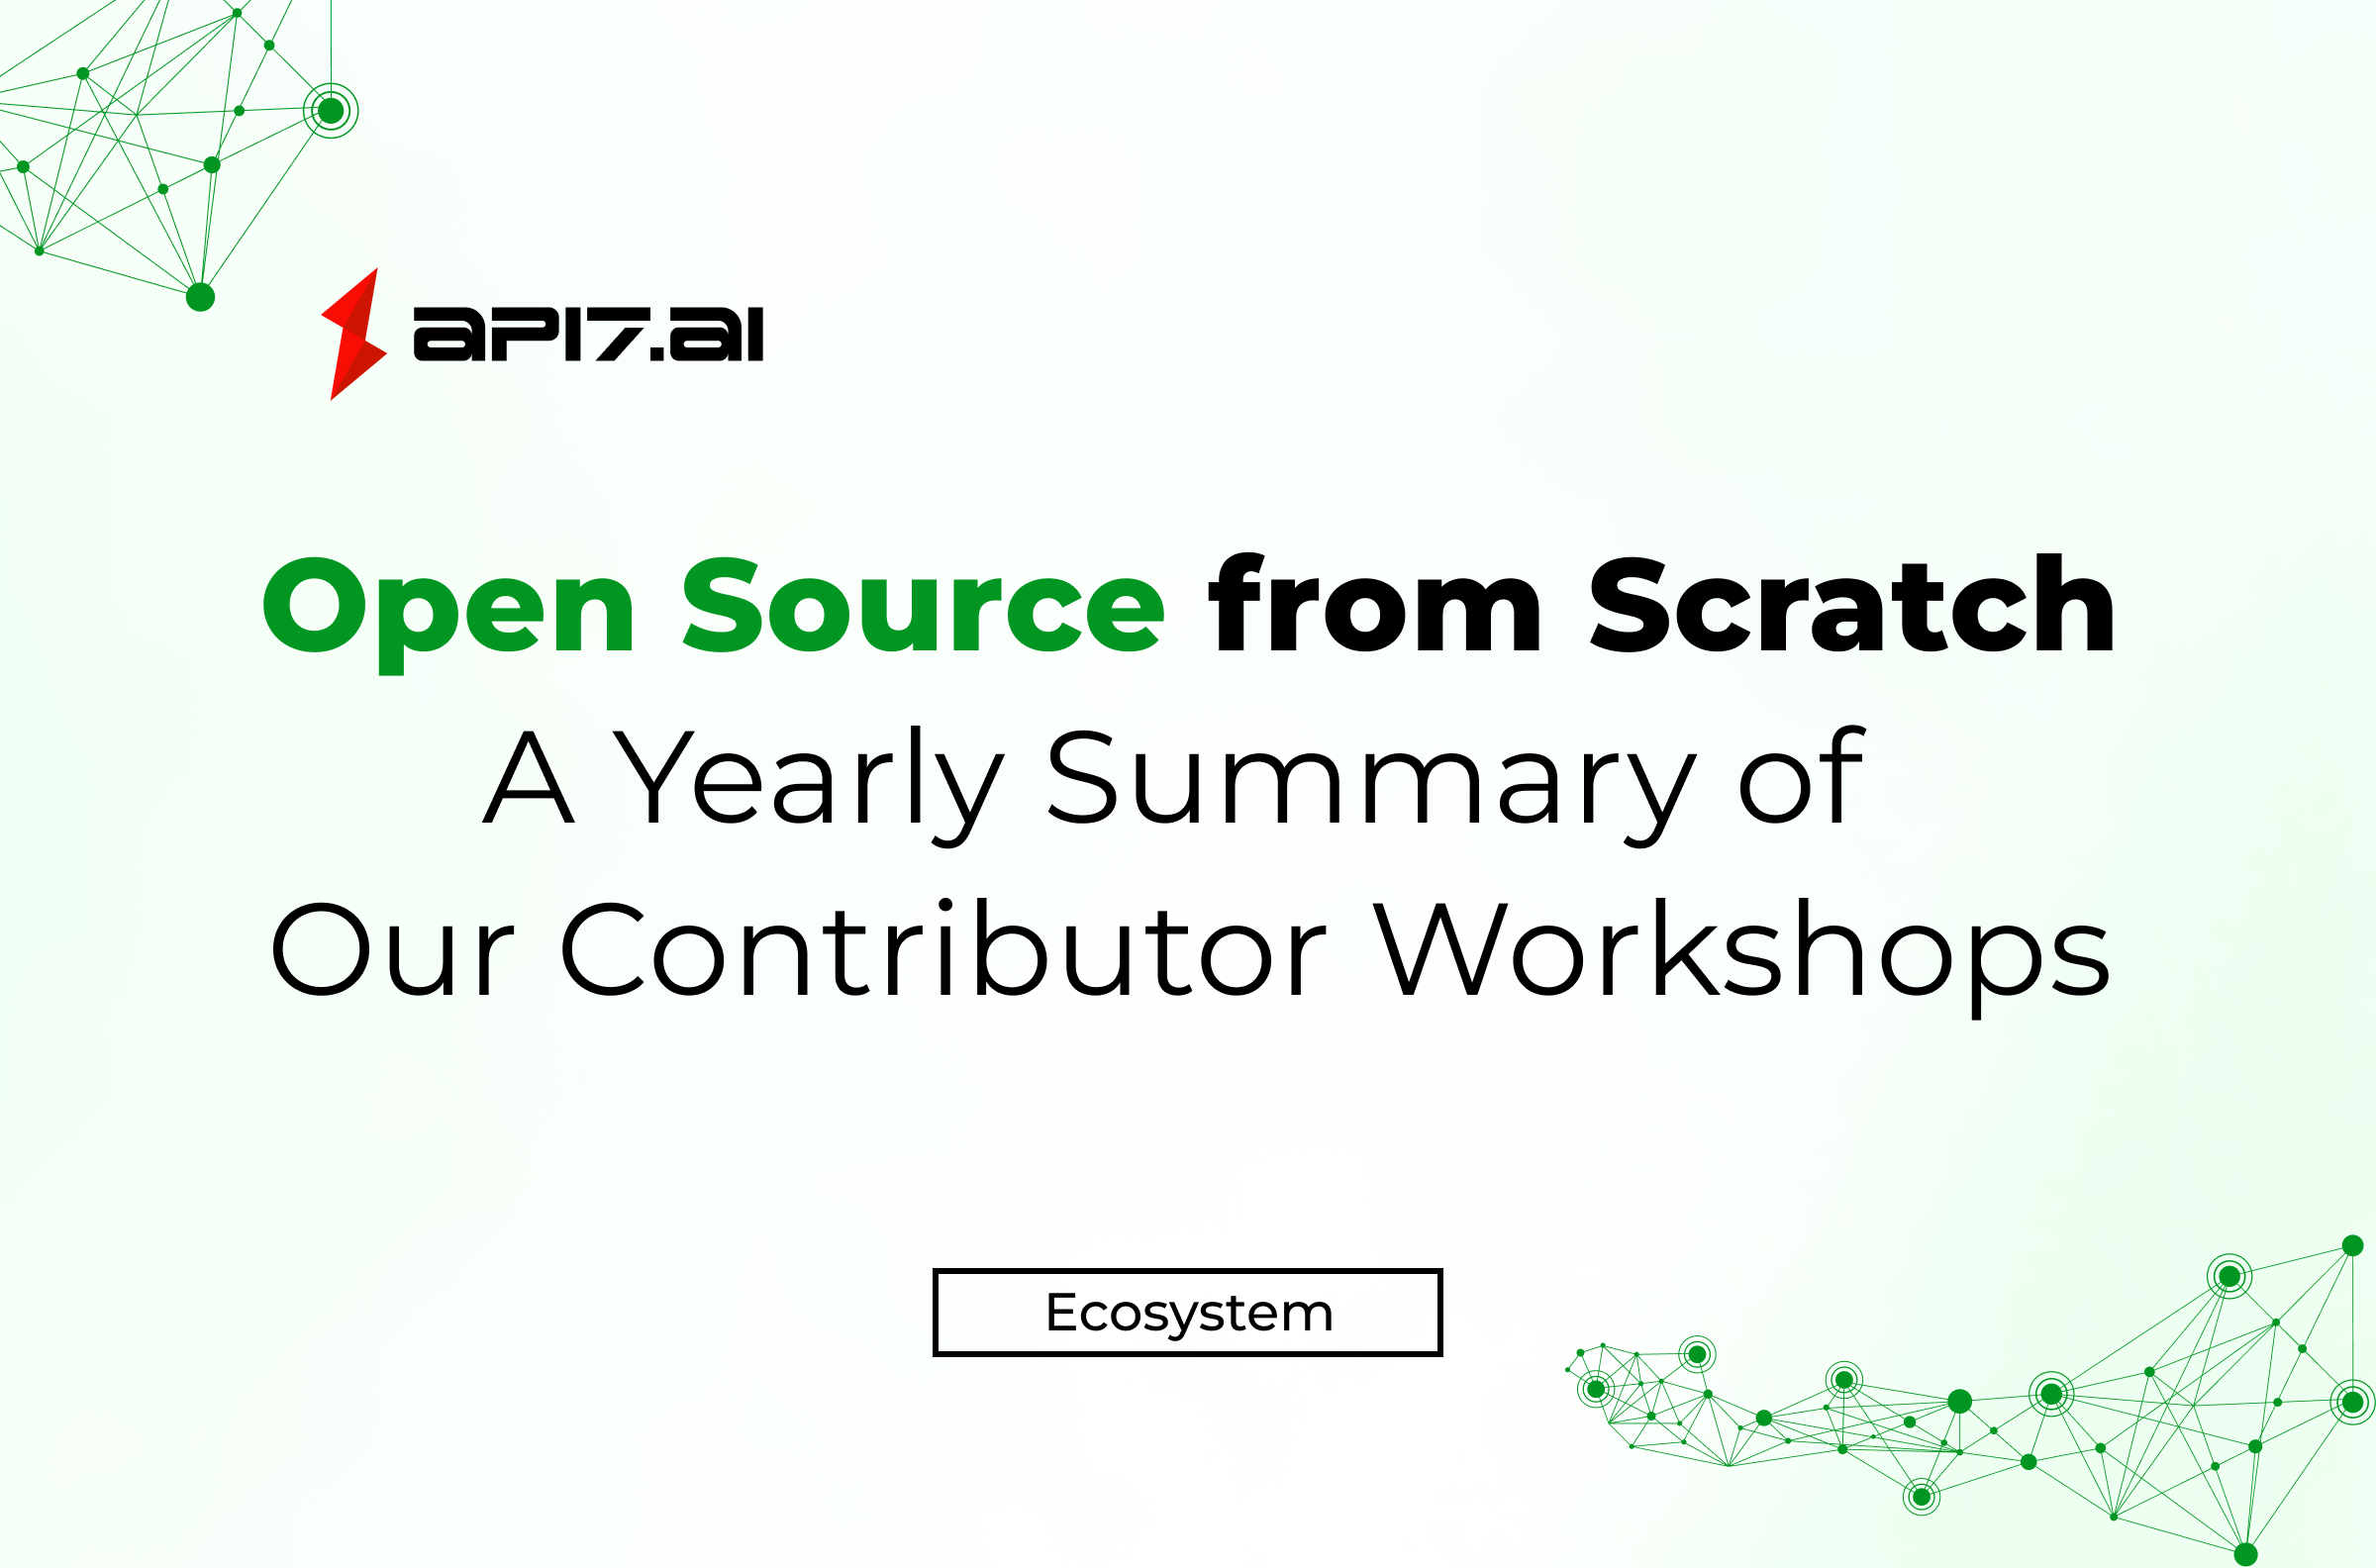 Open Source from Scratch, A Yearly Summary of Our Contributor Workshops